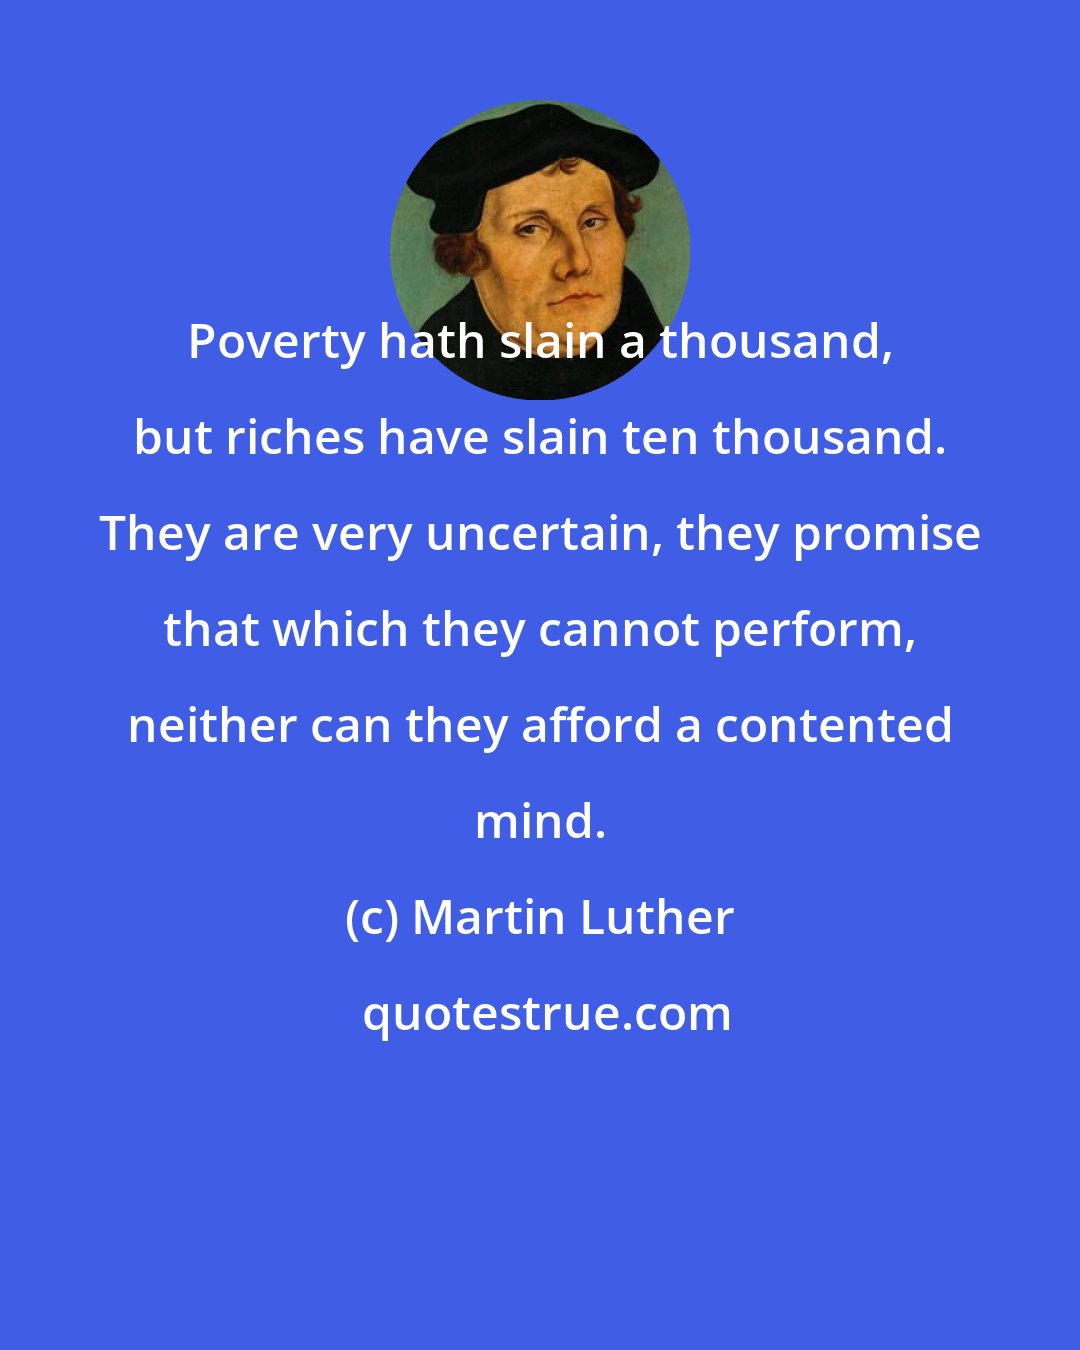 Martin Luther: Poverty hath slain a thousand, but riches have slain ten thousand. They are very uncertain, they promise that which they cannot perform, neither can they afford a contented mind.